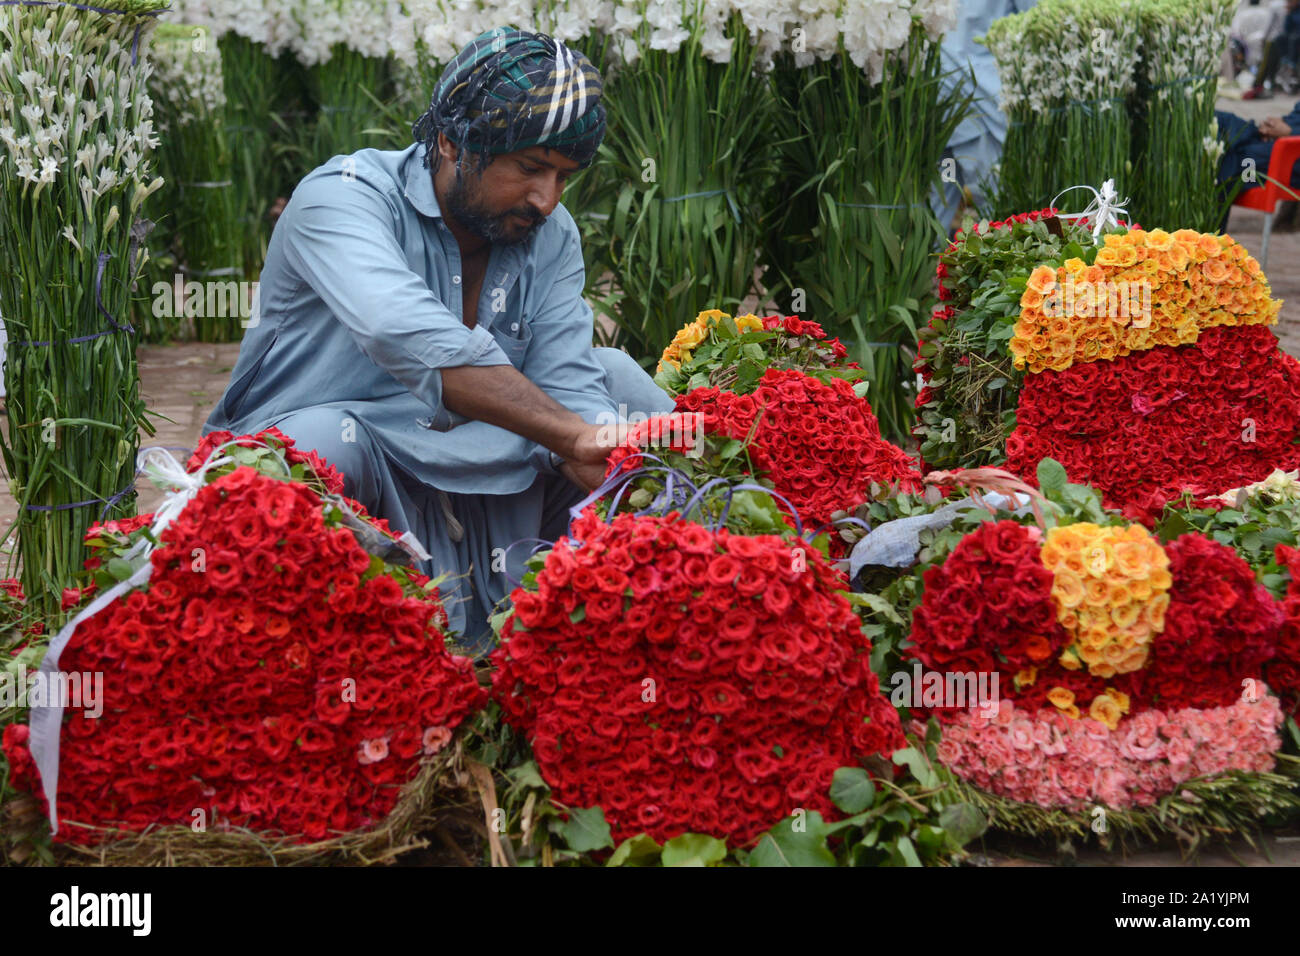 Flower wholesalers displays fresh roses, rose petals and garlands to  attract the customers at flowers market(Phool Mandi) in Lahore on September  28, 2019. Asias's Biggest Wholesale Flower Market popularly called as 'phool